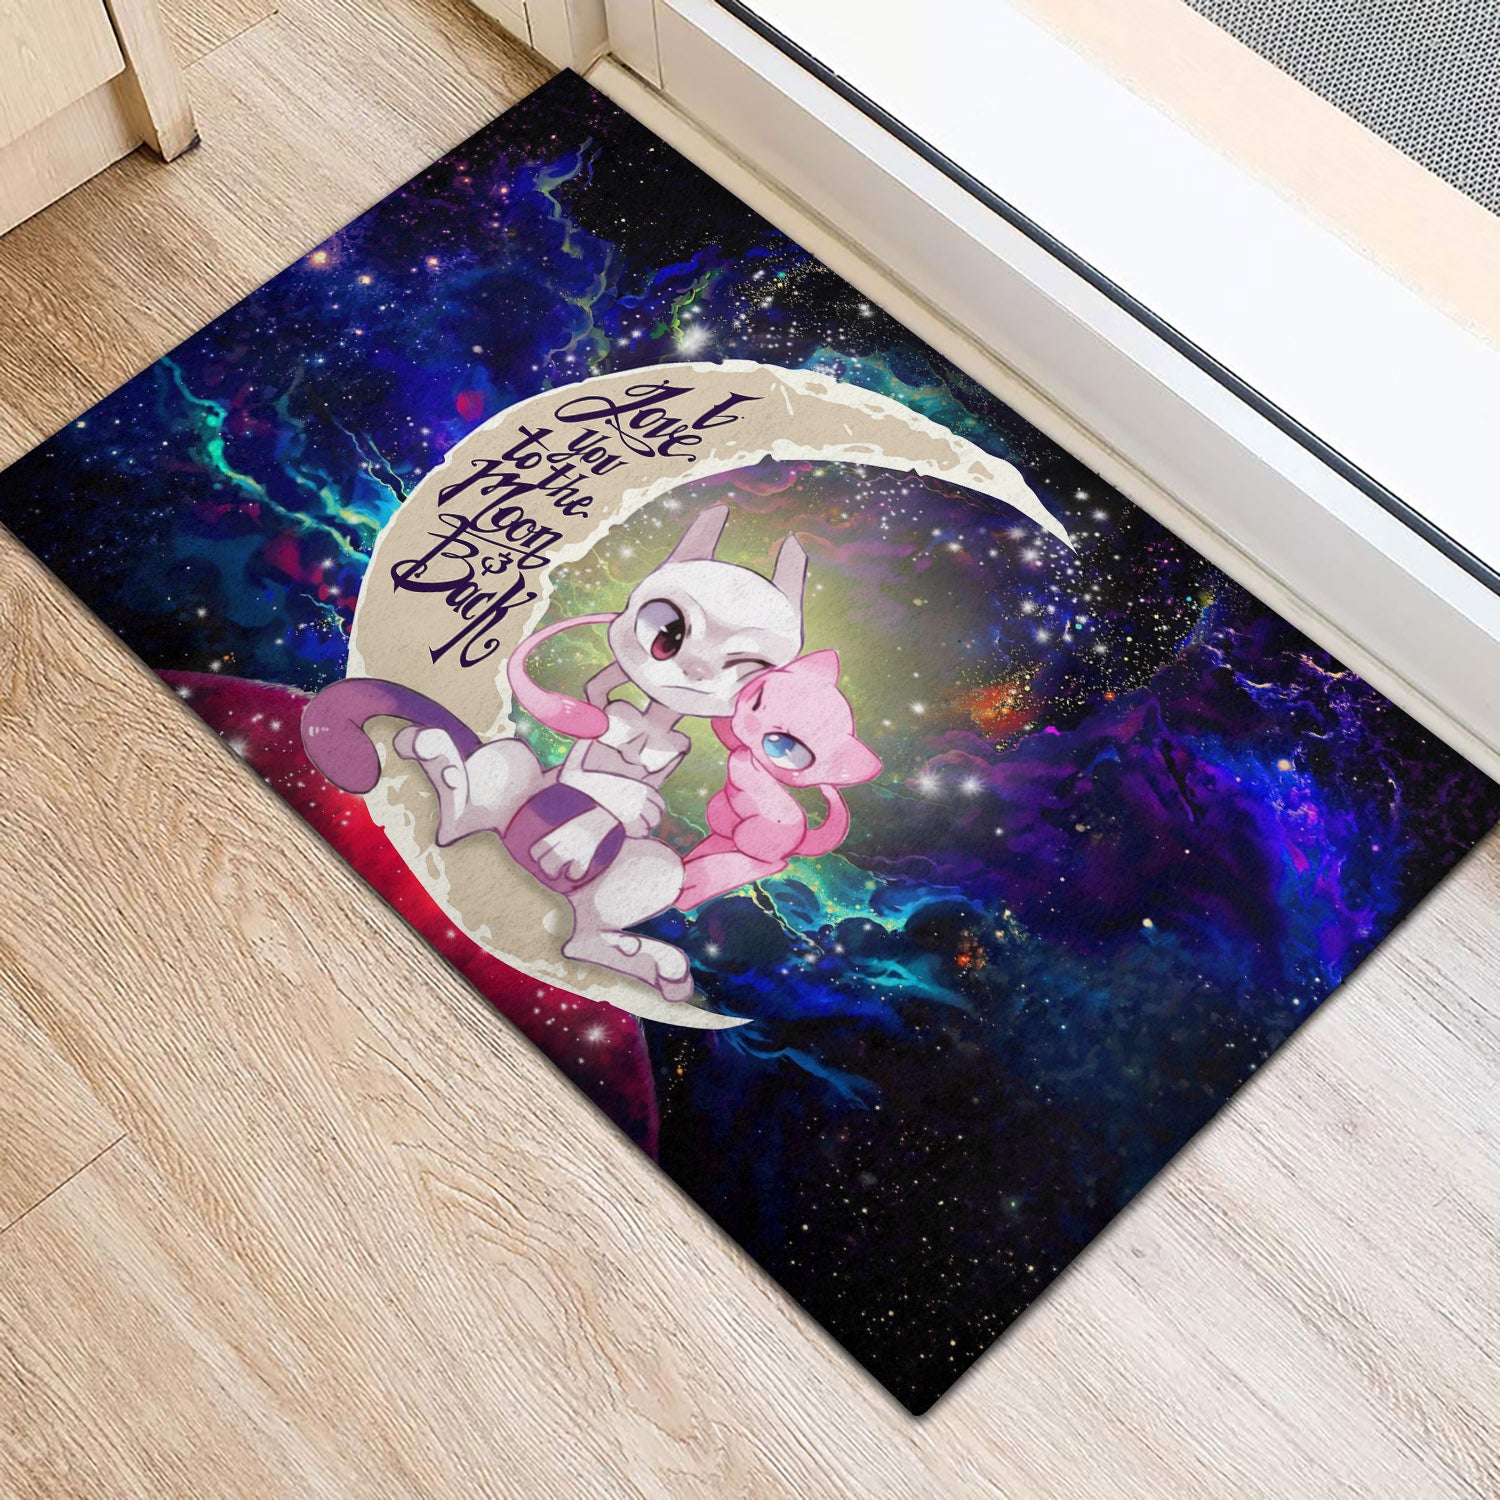 Pokemon Couple Mew Mewtwo Love You To The Moon Galaxy Back Door Mats Home Decor